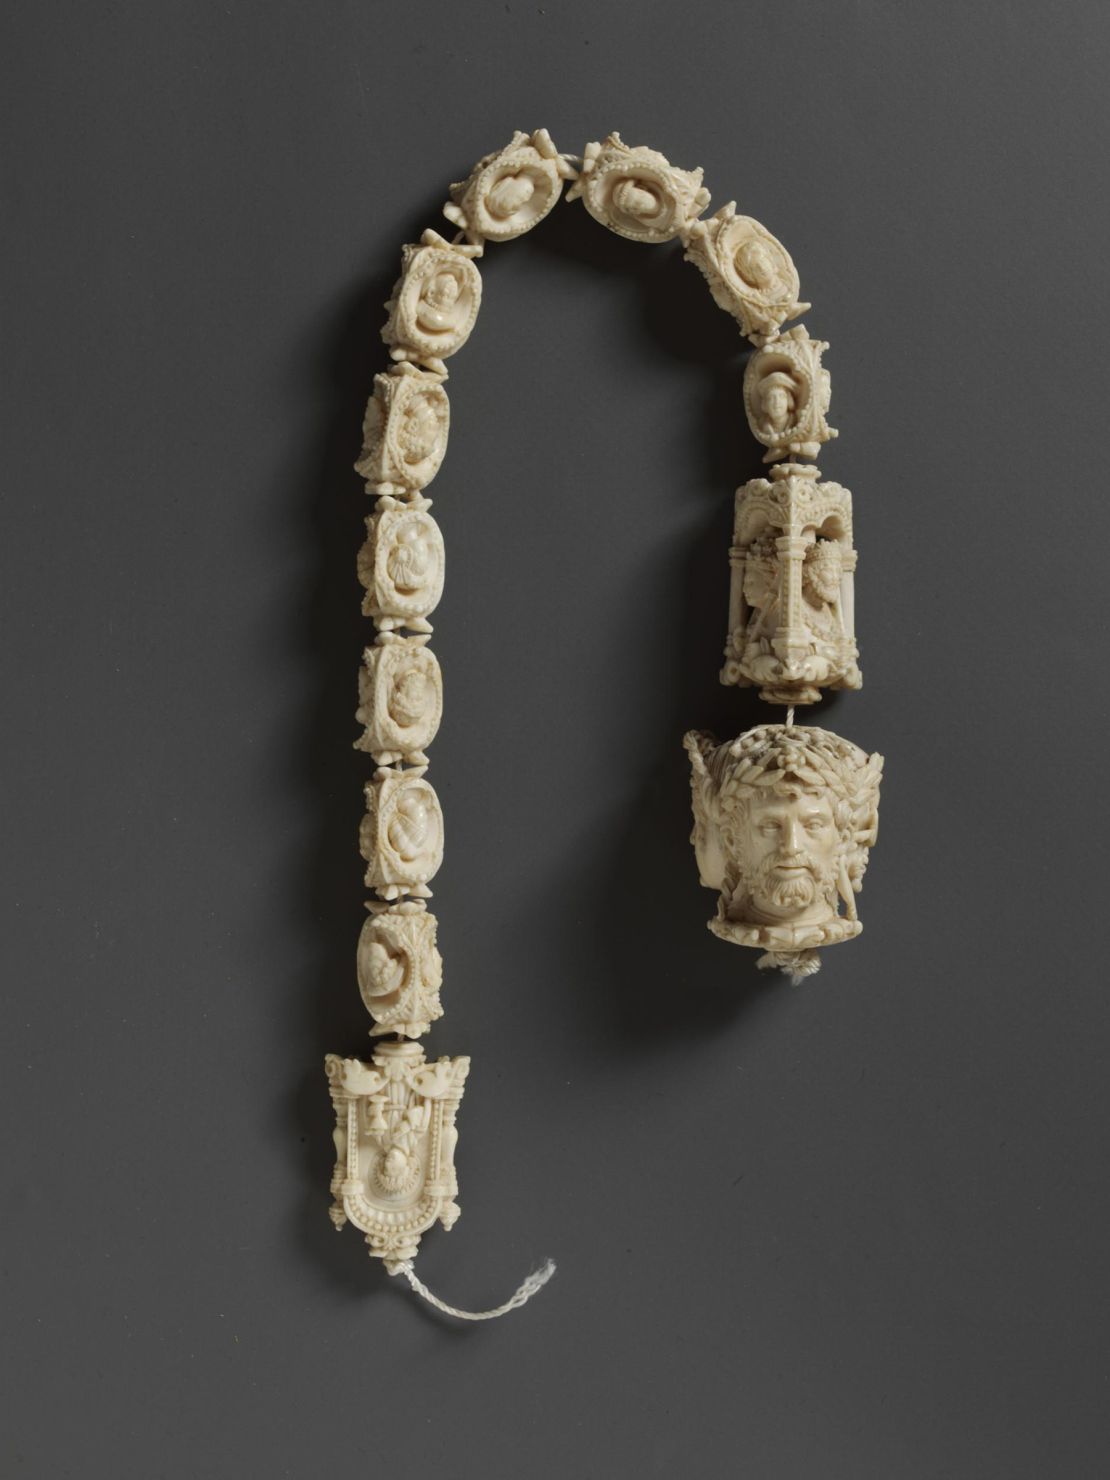 An Ivory chaplet (c. 1530) made in France or the southern Netherlands